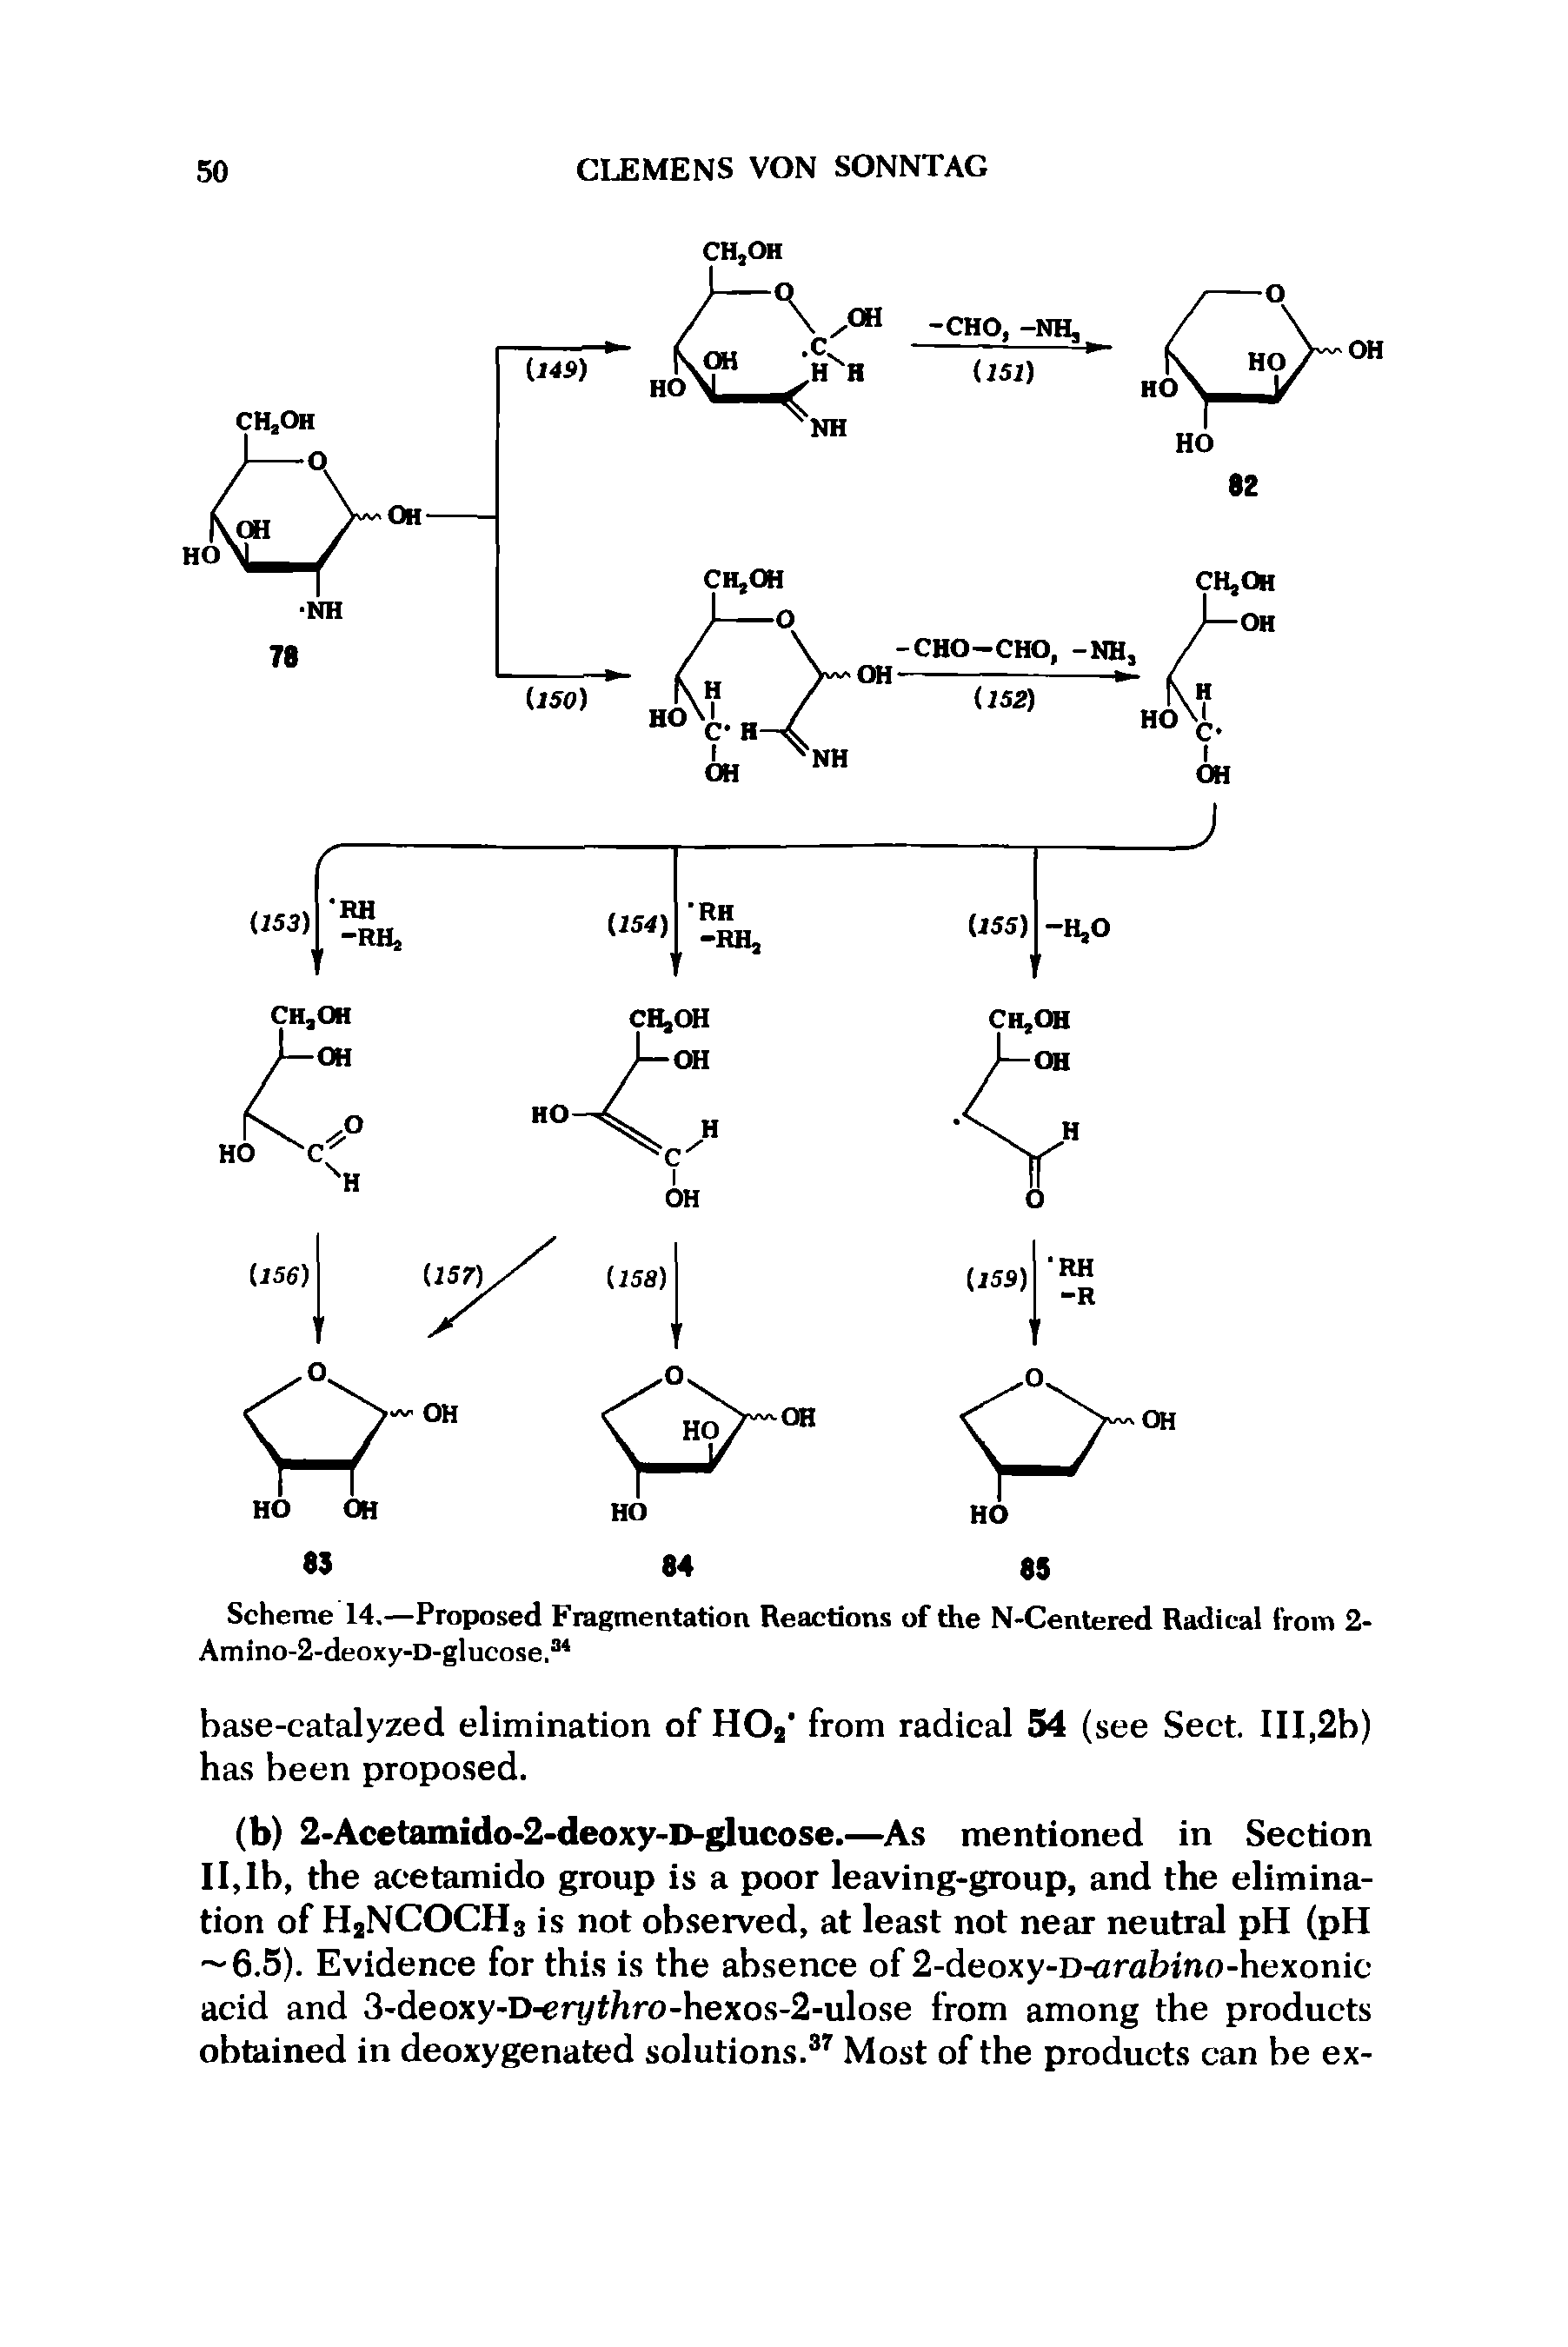 Scheme 14.—Proposed Fragmentation Reactions of the N-Centered Radical from 2-Amino-2-deoxy-D-glucose.34...